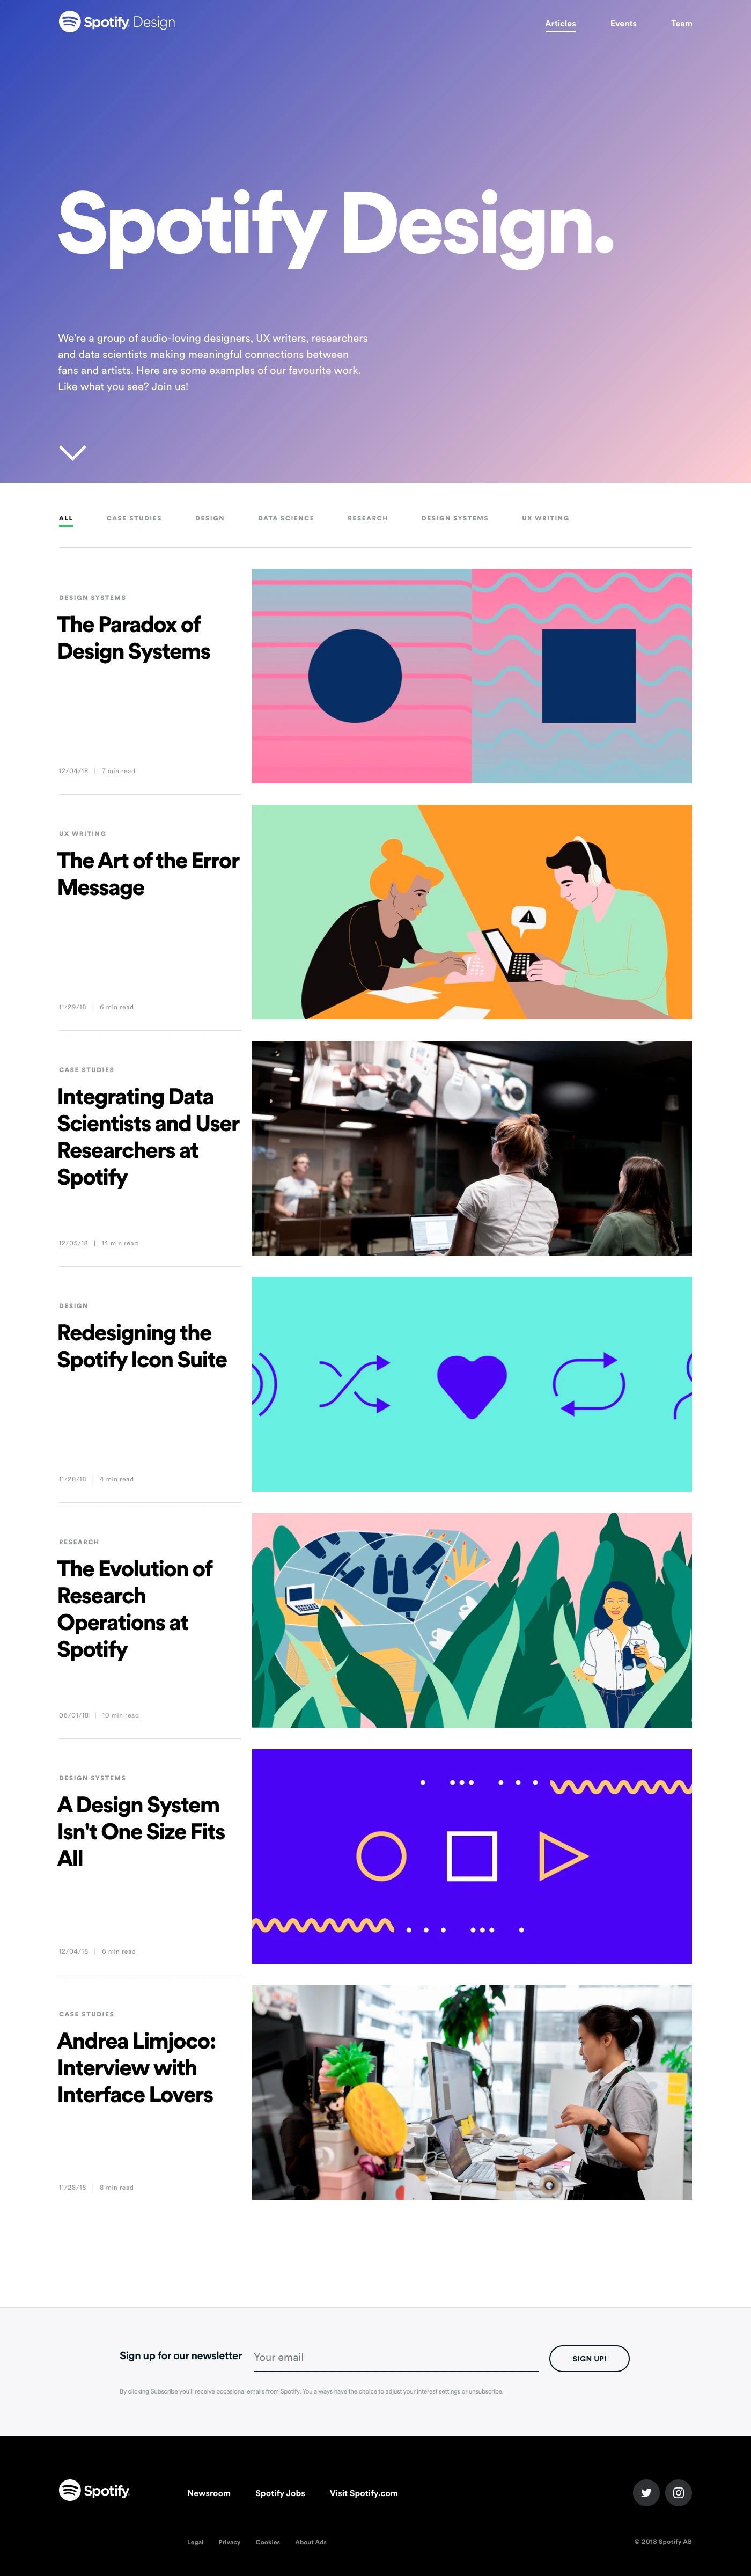 Spotify Design Landing Page Example: We’re a group of audio-loving designers, UX writers, researchers and data scientists making meaningful connections between fans and artists.